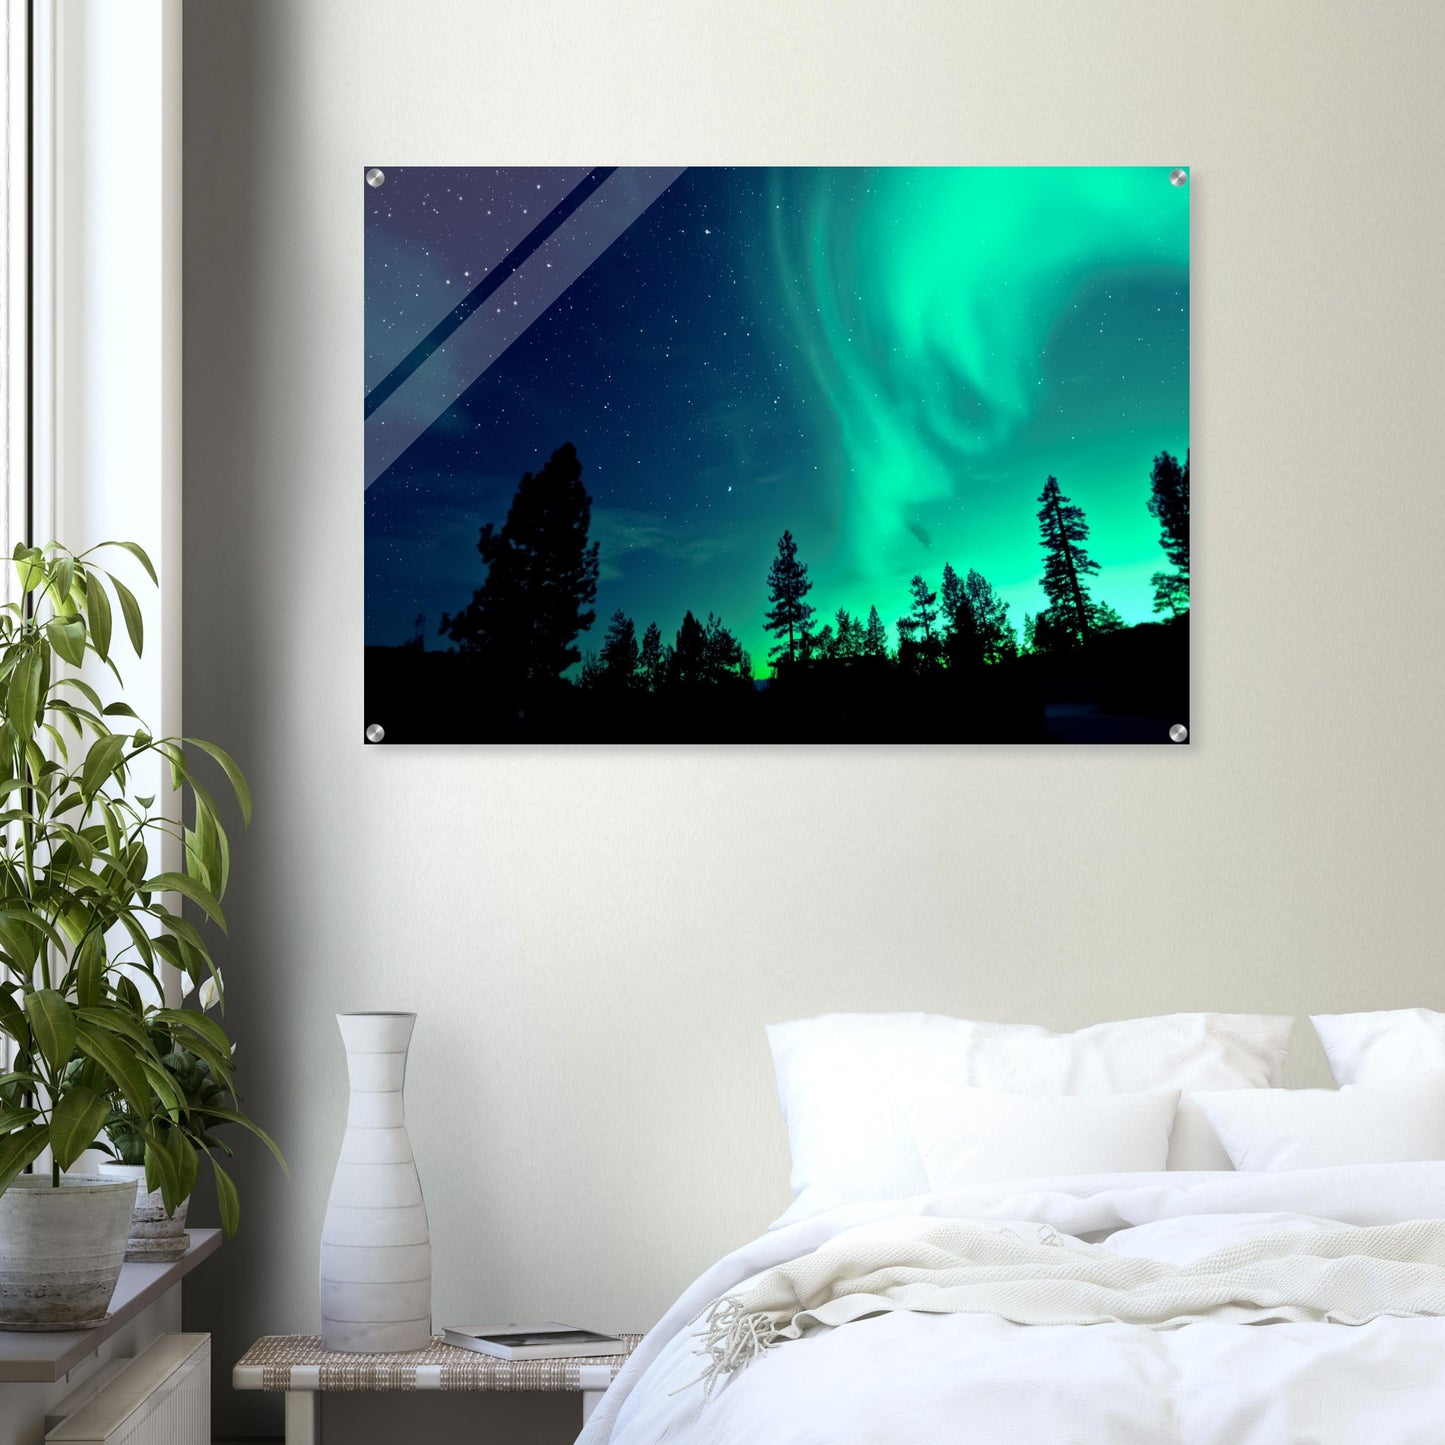 Unique Aurora Borealis Acrylic Prints - Multi Size Personalized Northern Light View - Modern Wall Art - Perfect Aurora Lovers Gift 10